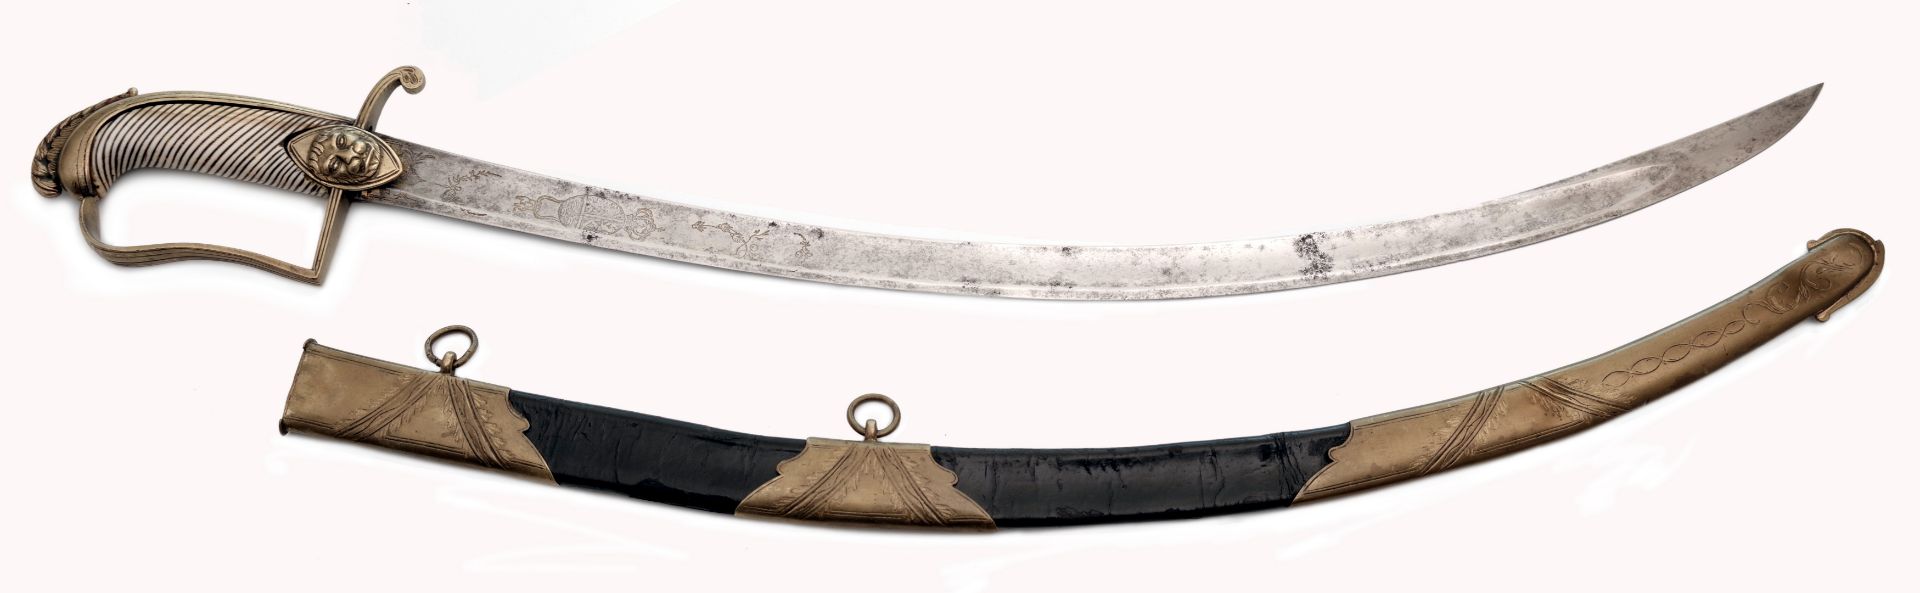 Danish-Norwegian sabre of a senior office from the Napoleonic era - Image 6 of 6